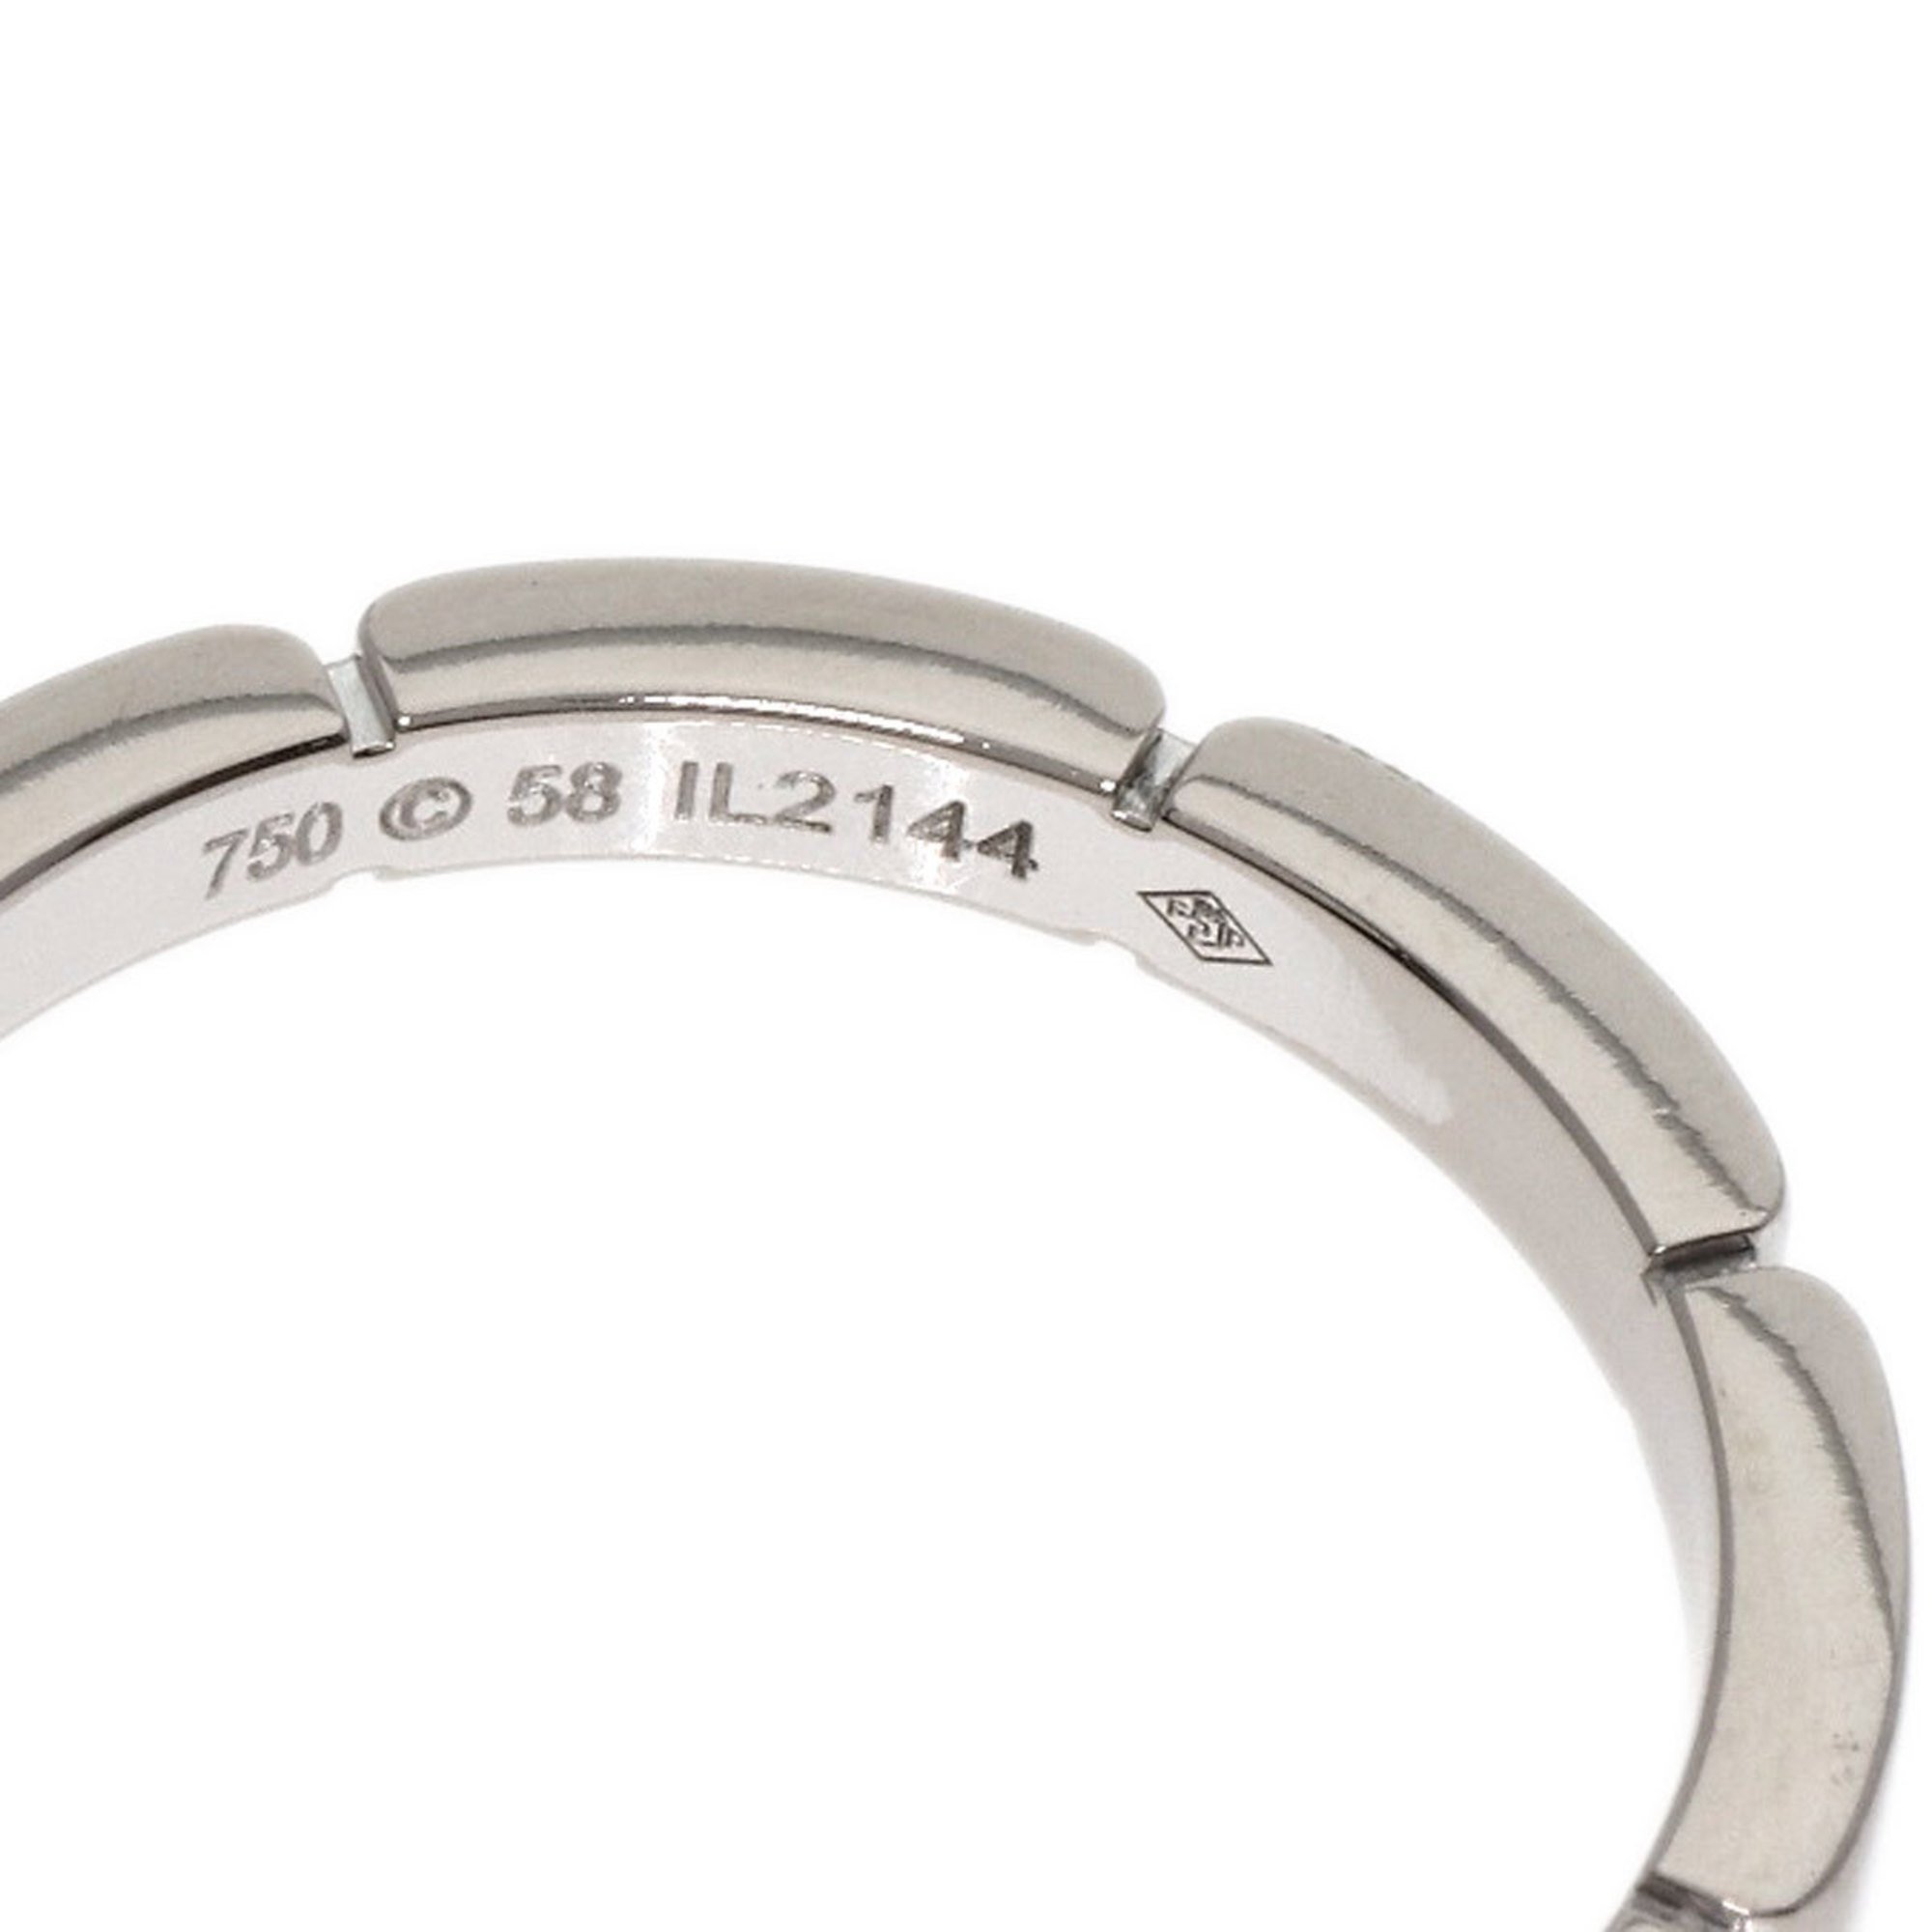 Cartier Maillon Panthere #58 Ring, 18K White Gold, Women's, CARTIER